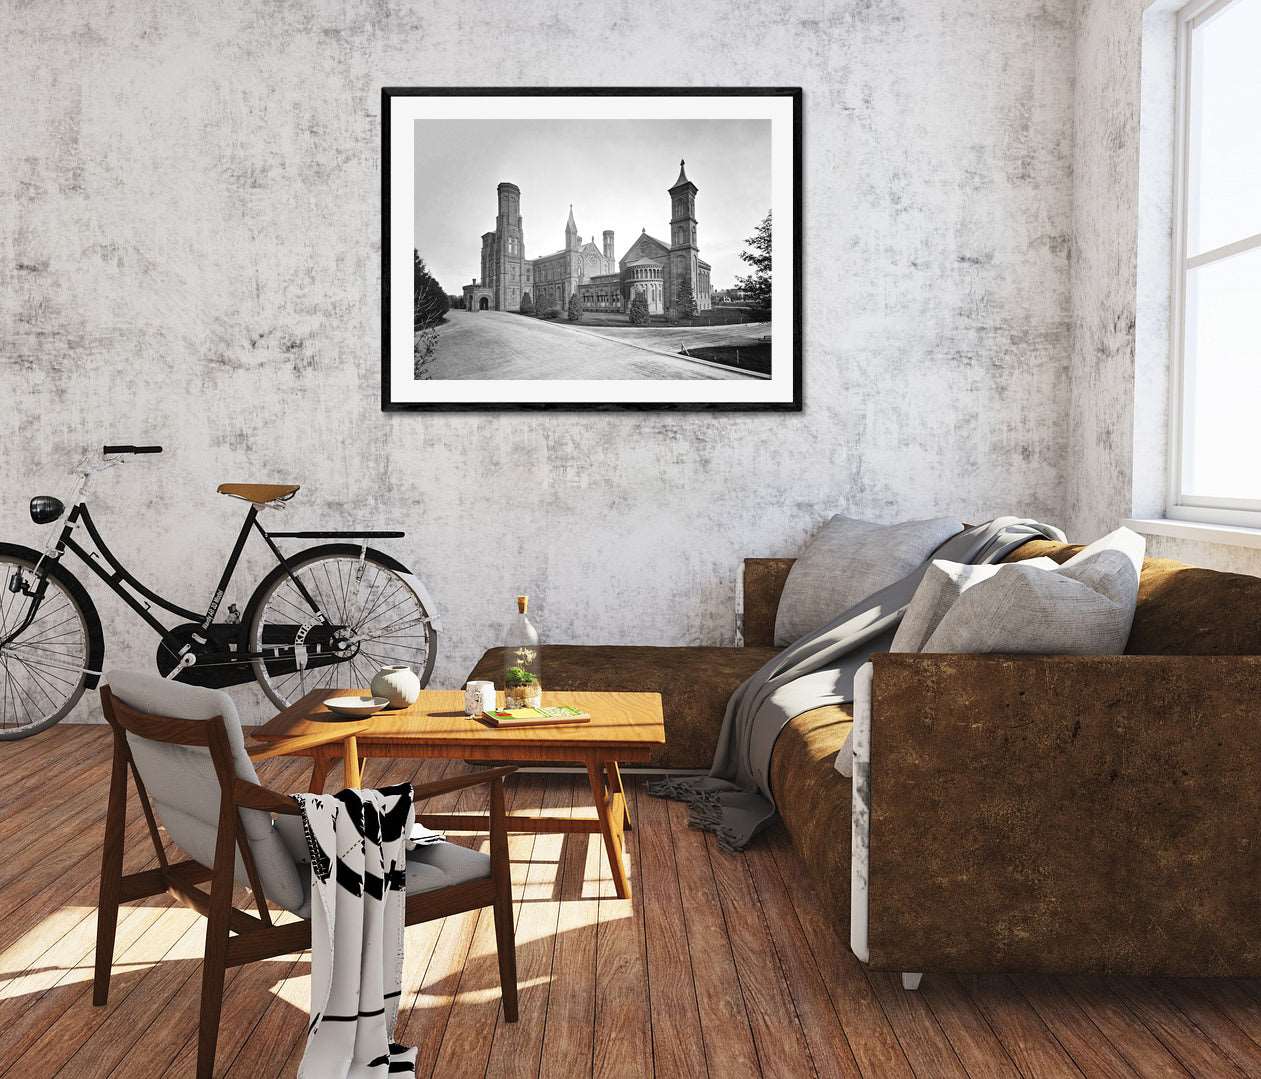 A rendering of a living room with a framed paper print of a black and white photo of the Smithsonian Castle